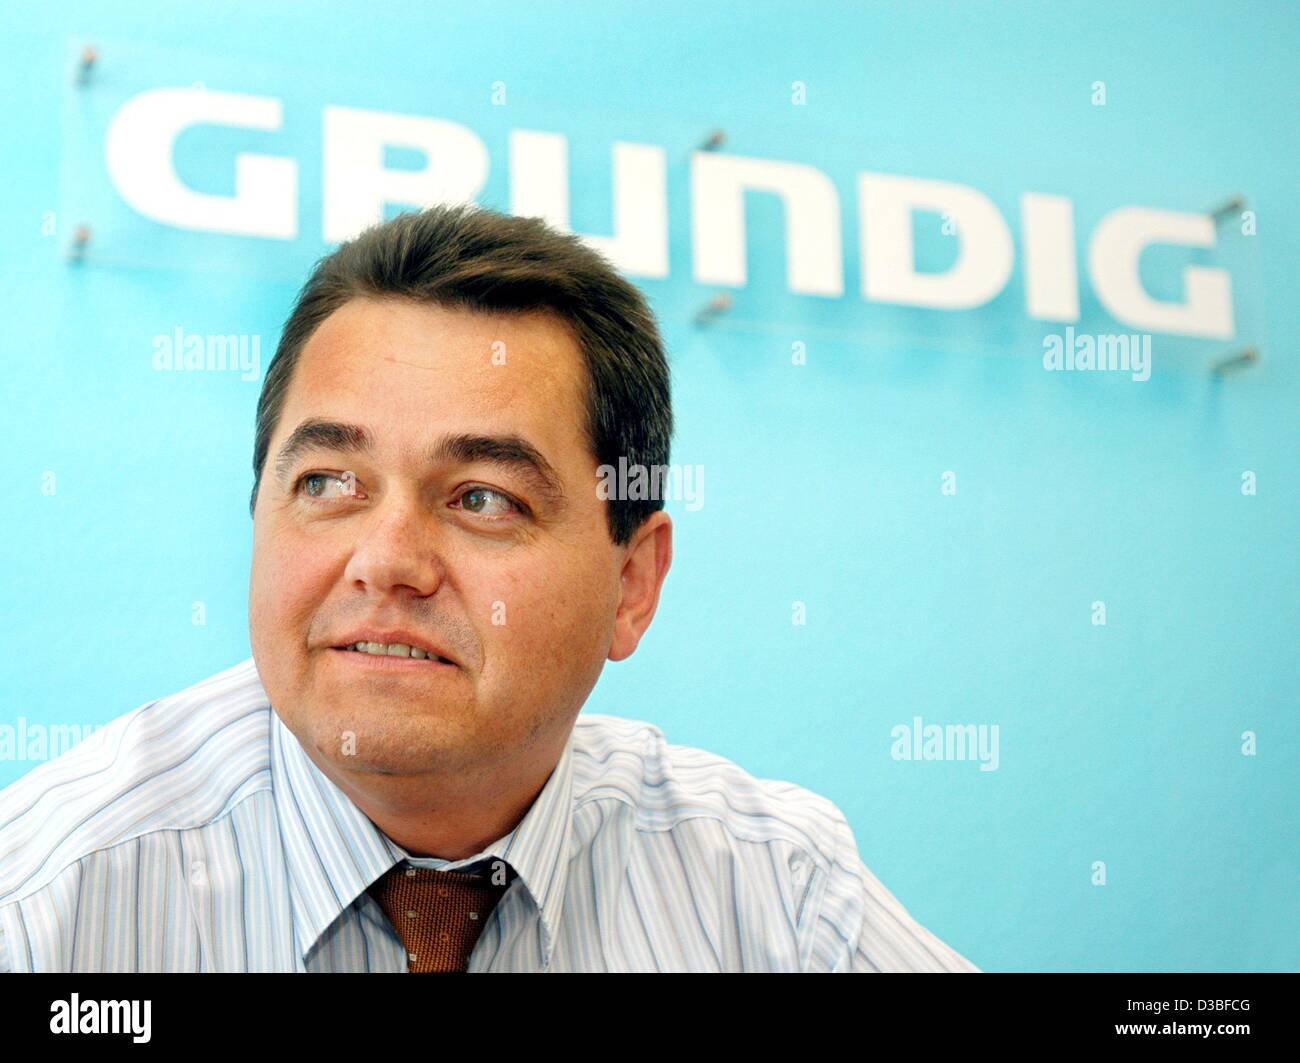 (dpa) - Werner Saalfrank, CEO of the electronics company Grundig, pictured during a press conference in Nuremberg, Germany, 25 June 2003. Grundig announced that it will continue its business operations despite the company's filing for insolvency. Grundig, a company that was once a byword for the Ger Stock Photo